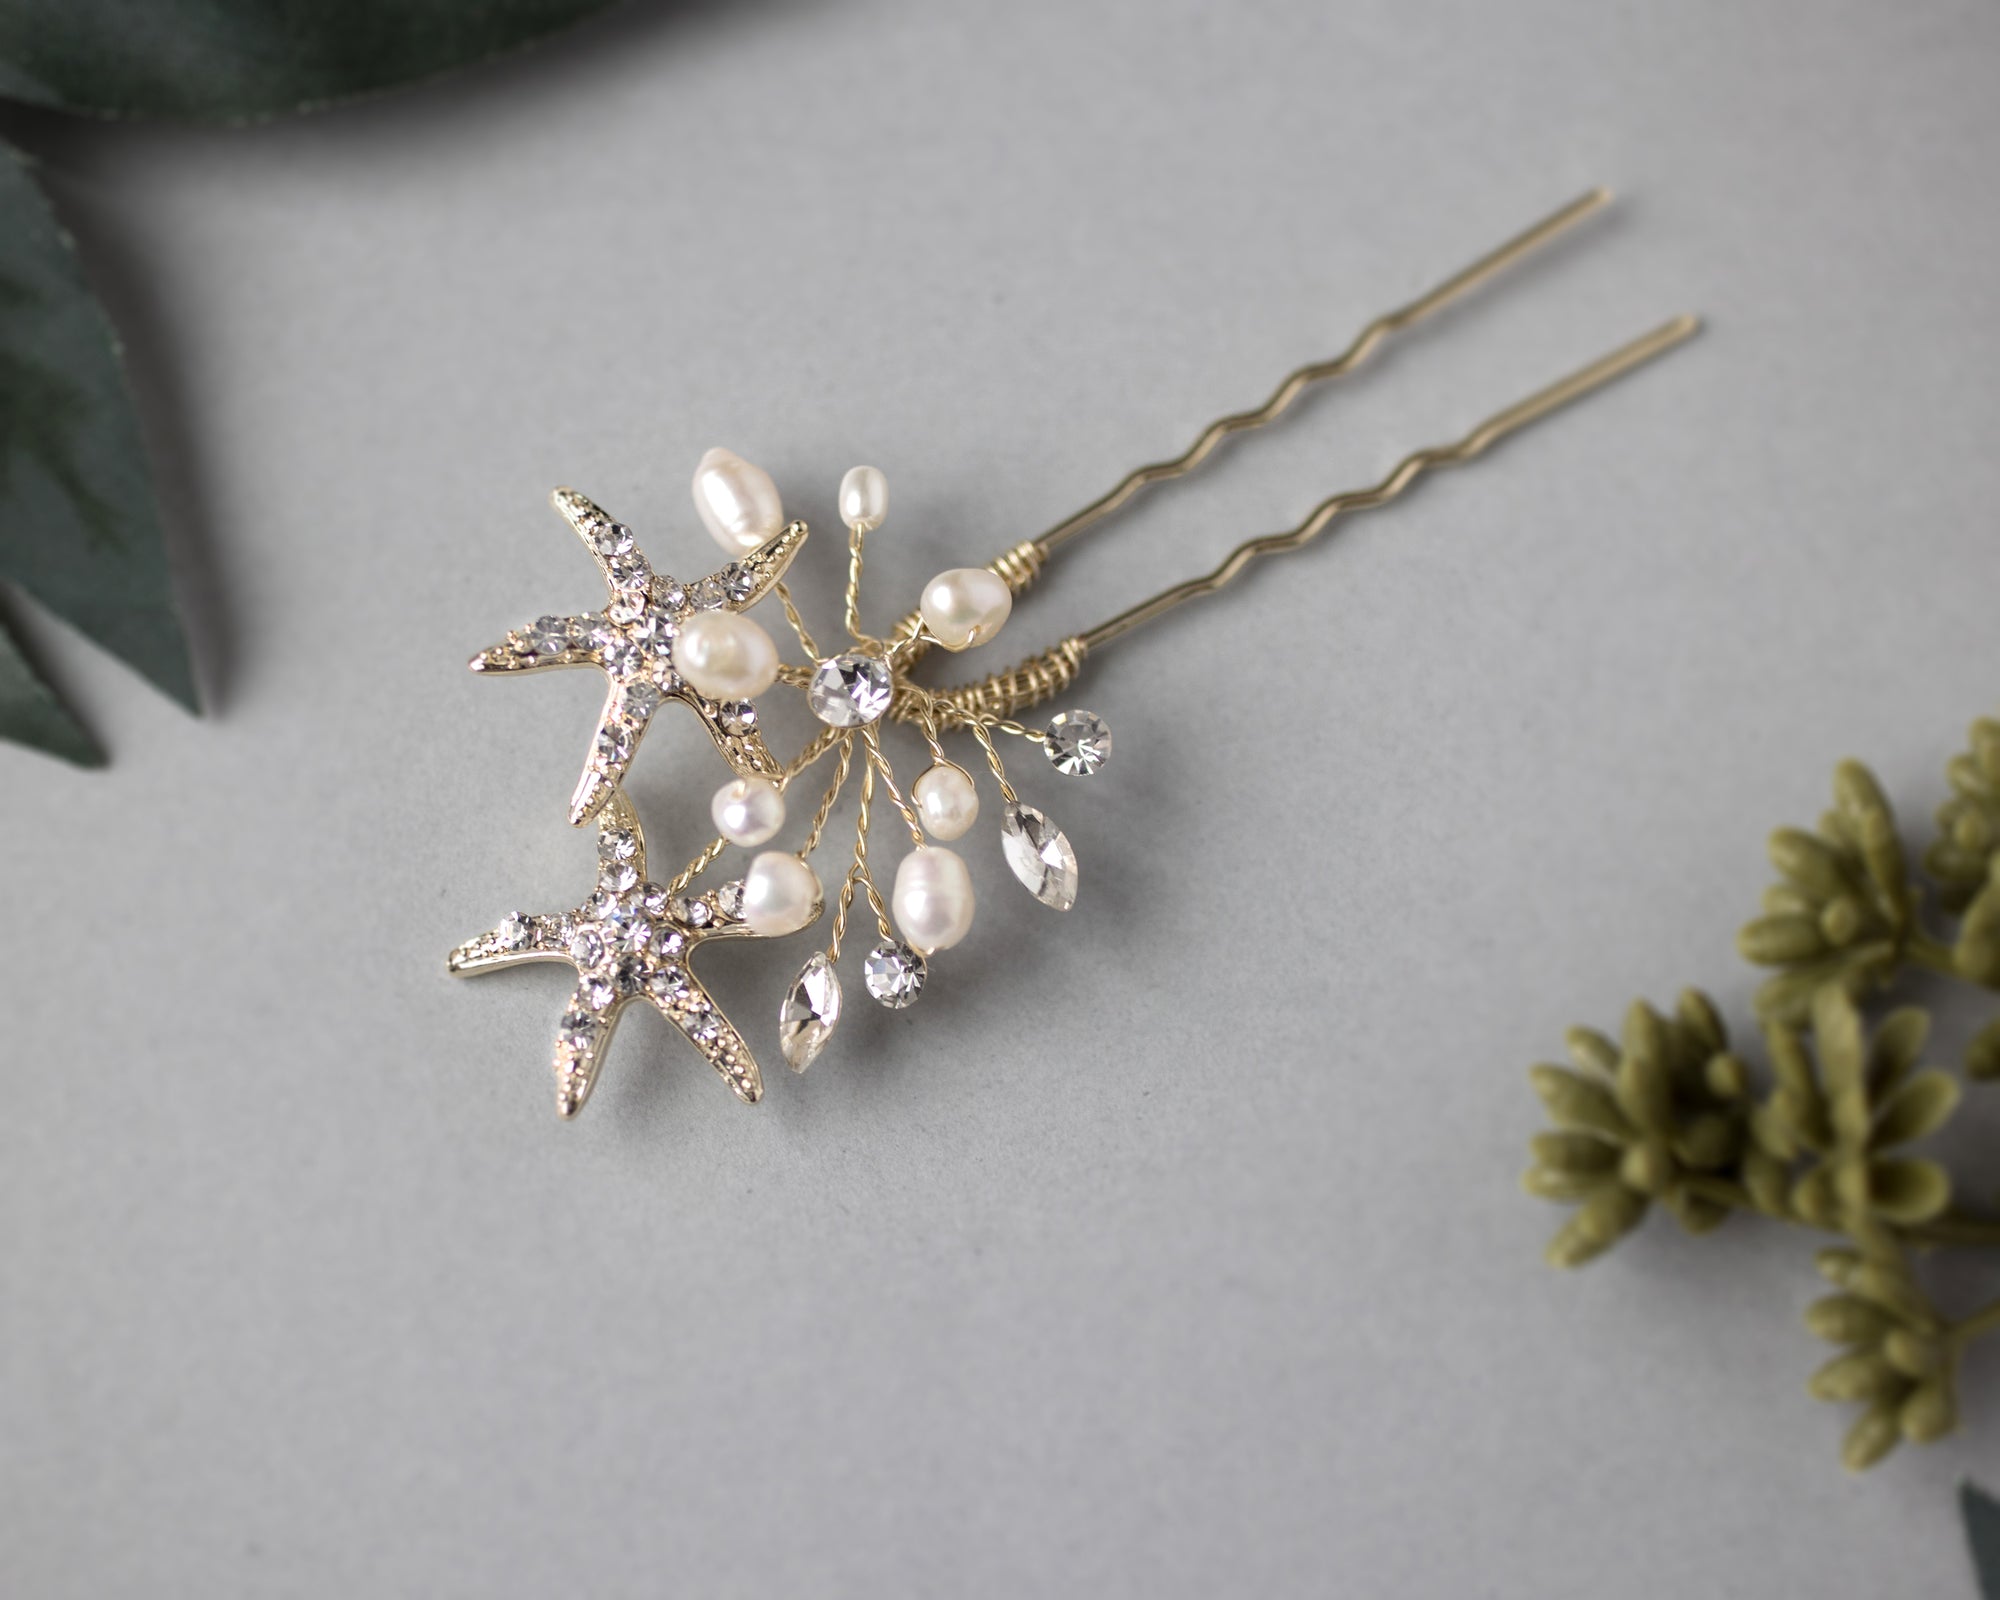 Starfish Hair Pin with Pearls in Light Gold - Cassandra Lynne